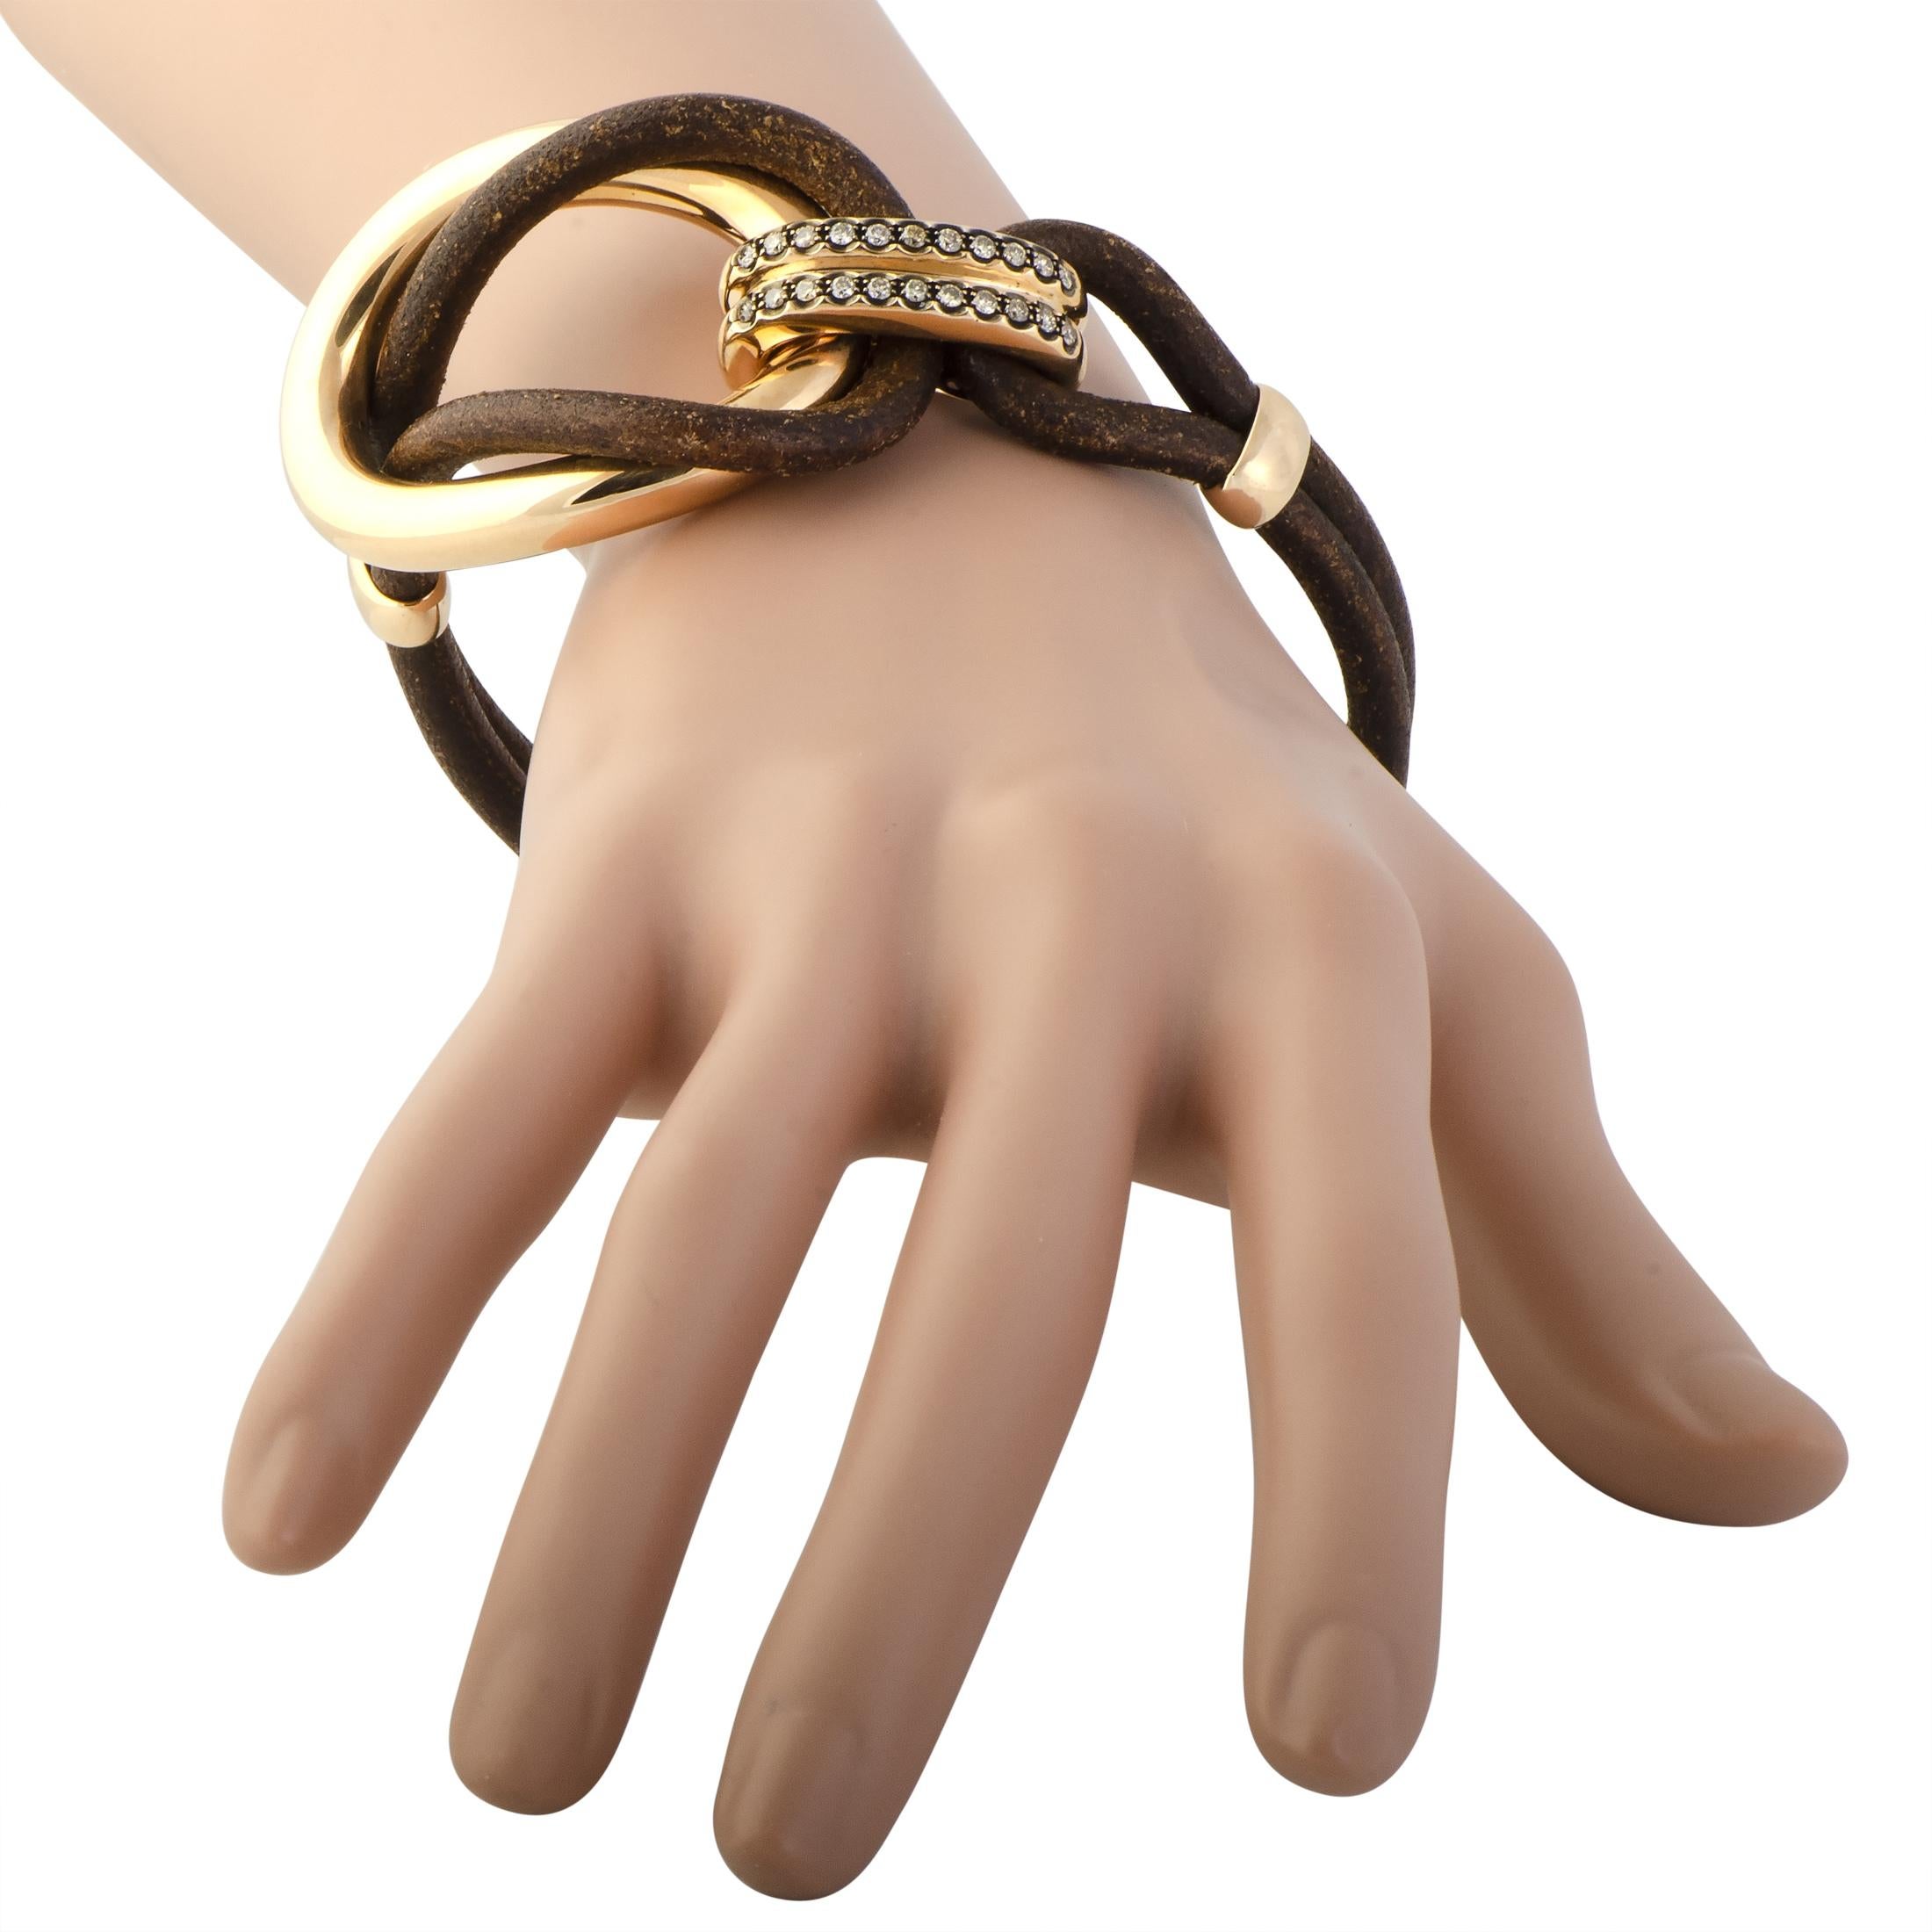 A compellingly fashionable look is achieved in this superb jewelry piece by combining the ever-luxurious gold with stylish leather and topping it all off with sophisticated brown diamonds. The bracelet is exquisitely designed by Bucherer and it is